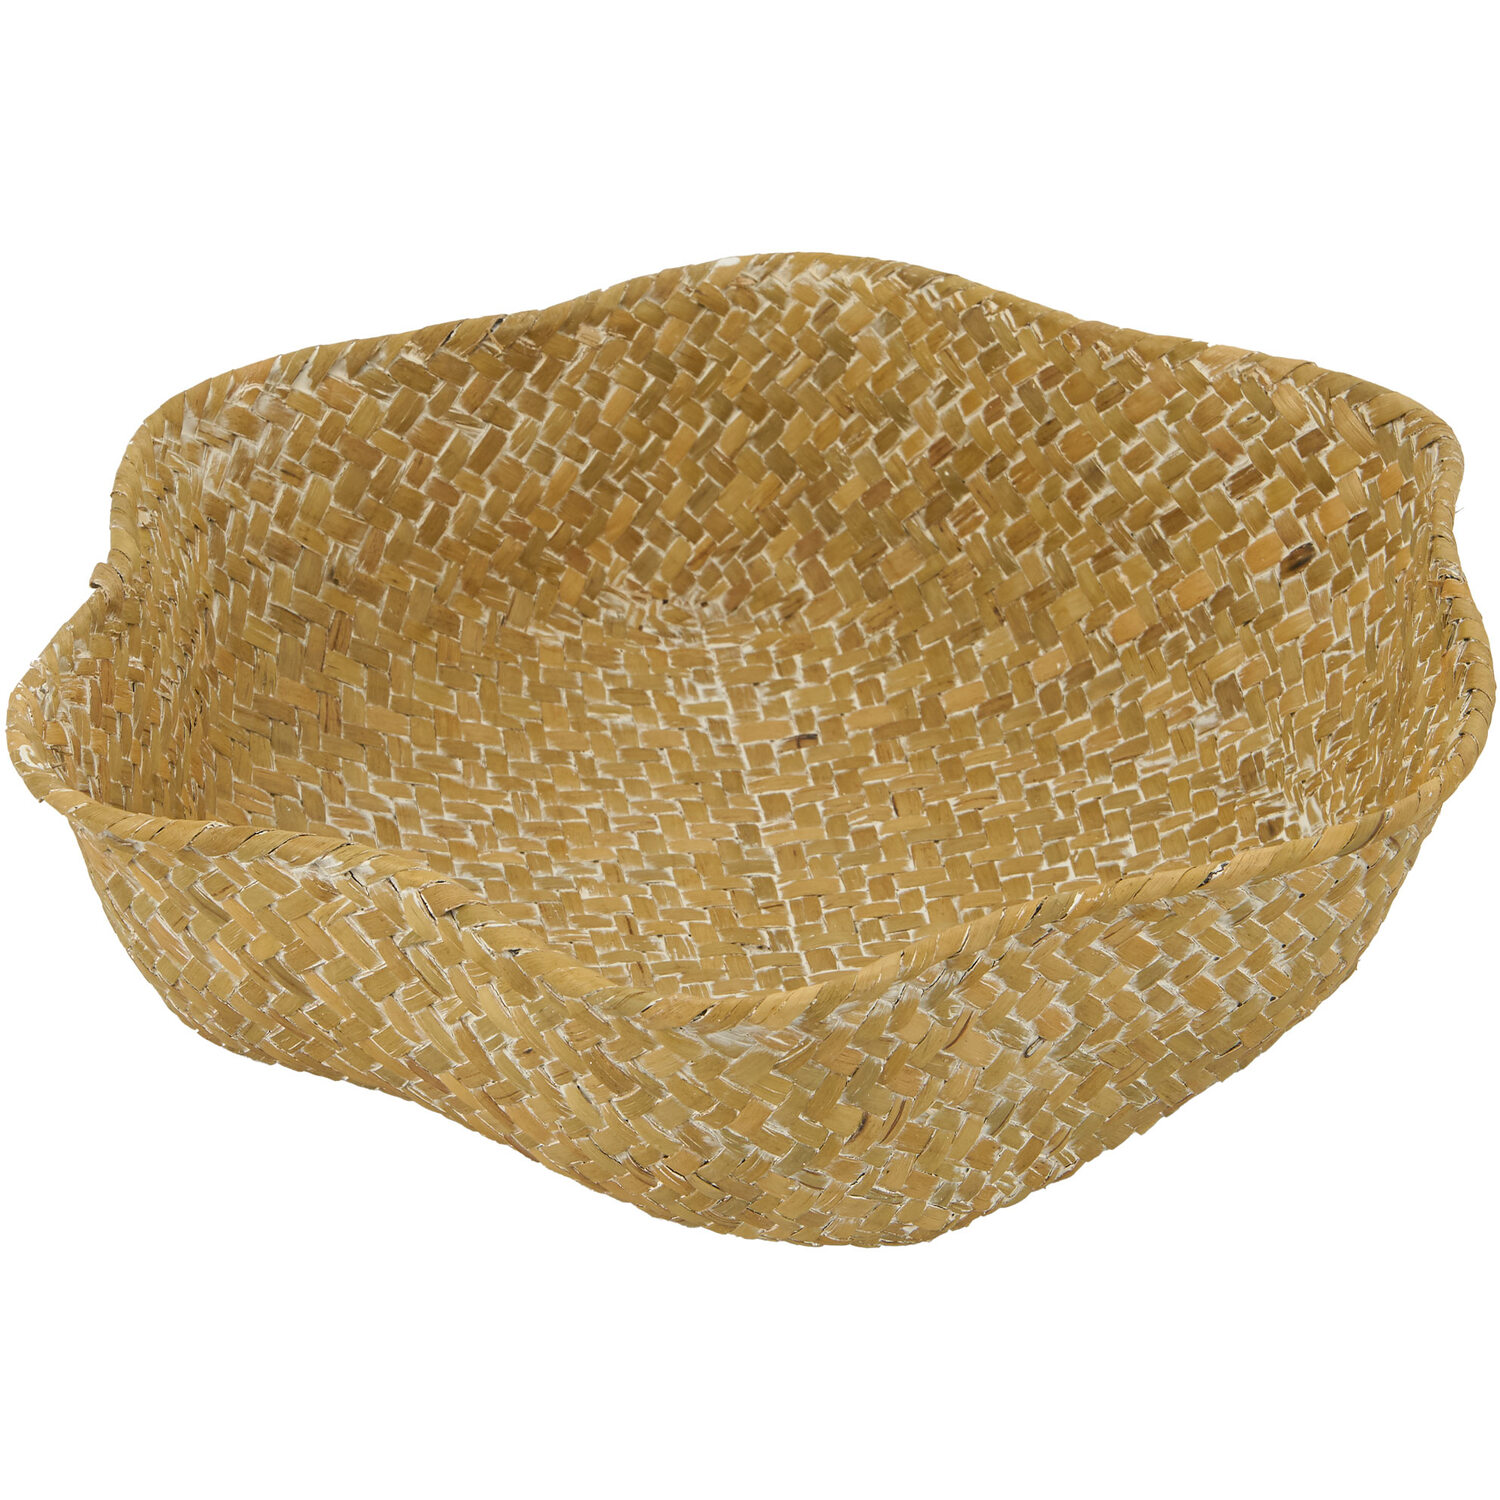 Nell Brown Seagrass Basket Image 1